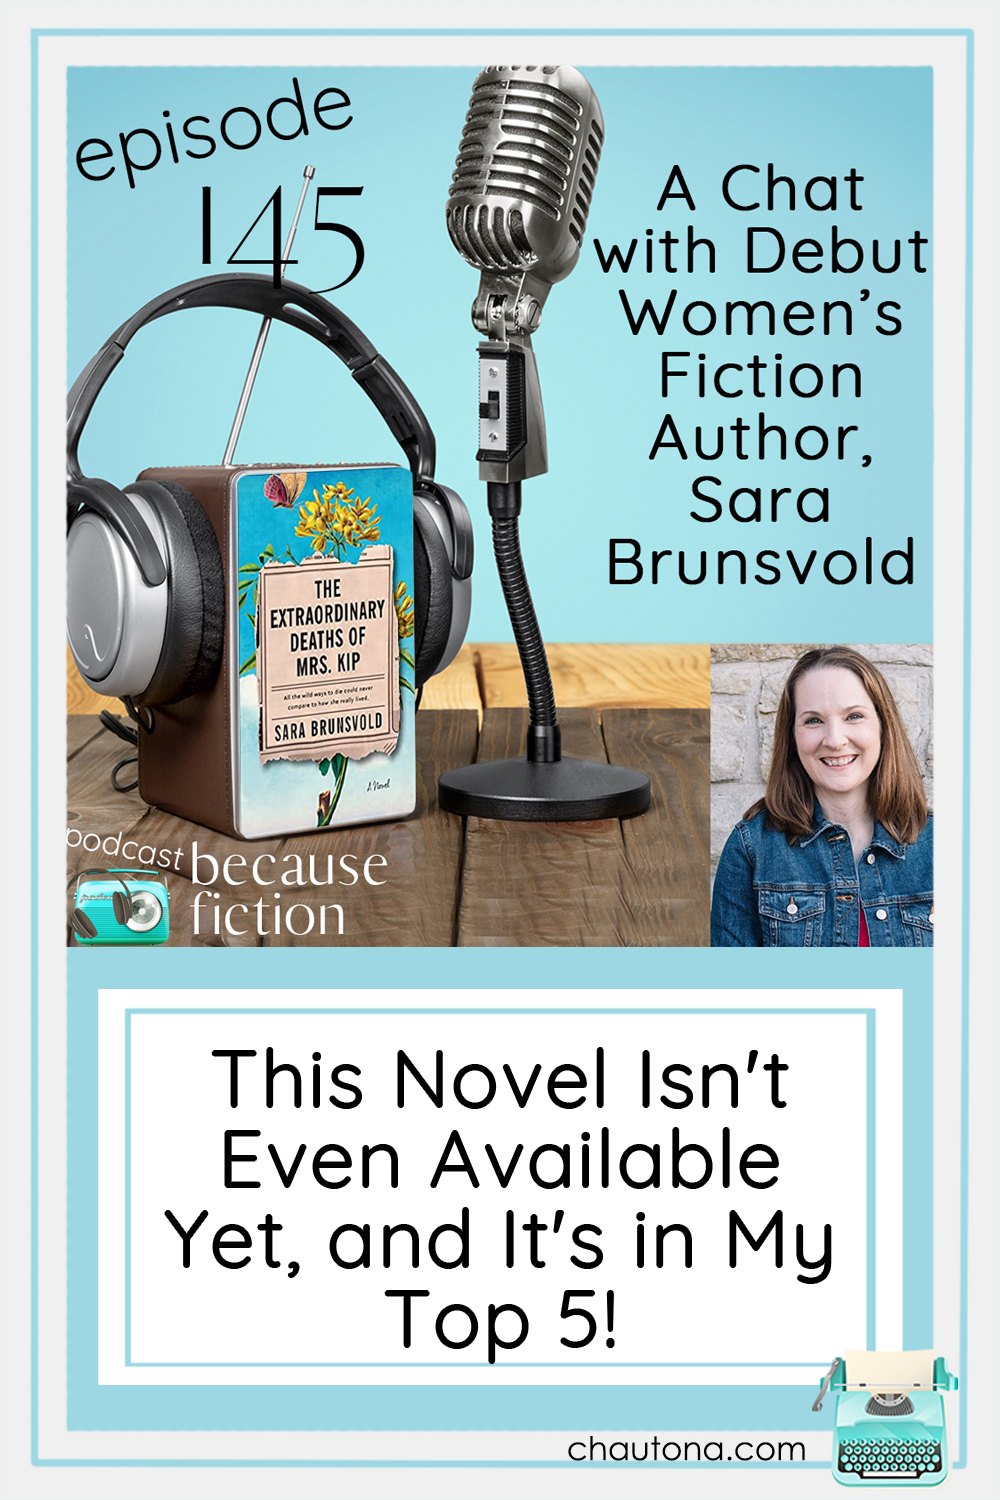 Stay tuned for July 5 when The Extraordinary Deaths of Mrs. Kip by Sara Brunsvold releases. You won't want to miss this book! via @chautonahavig